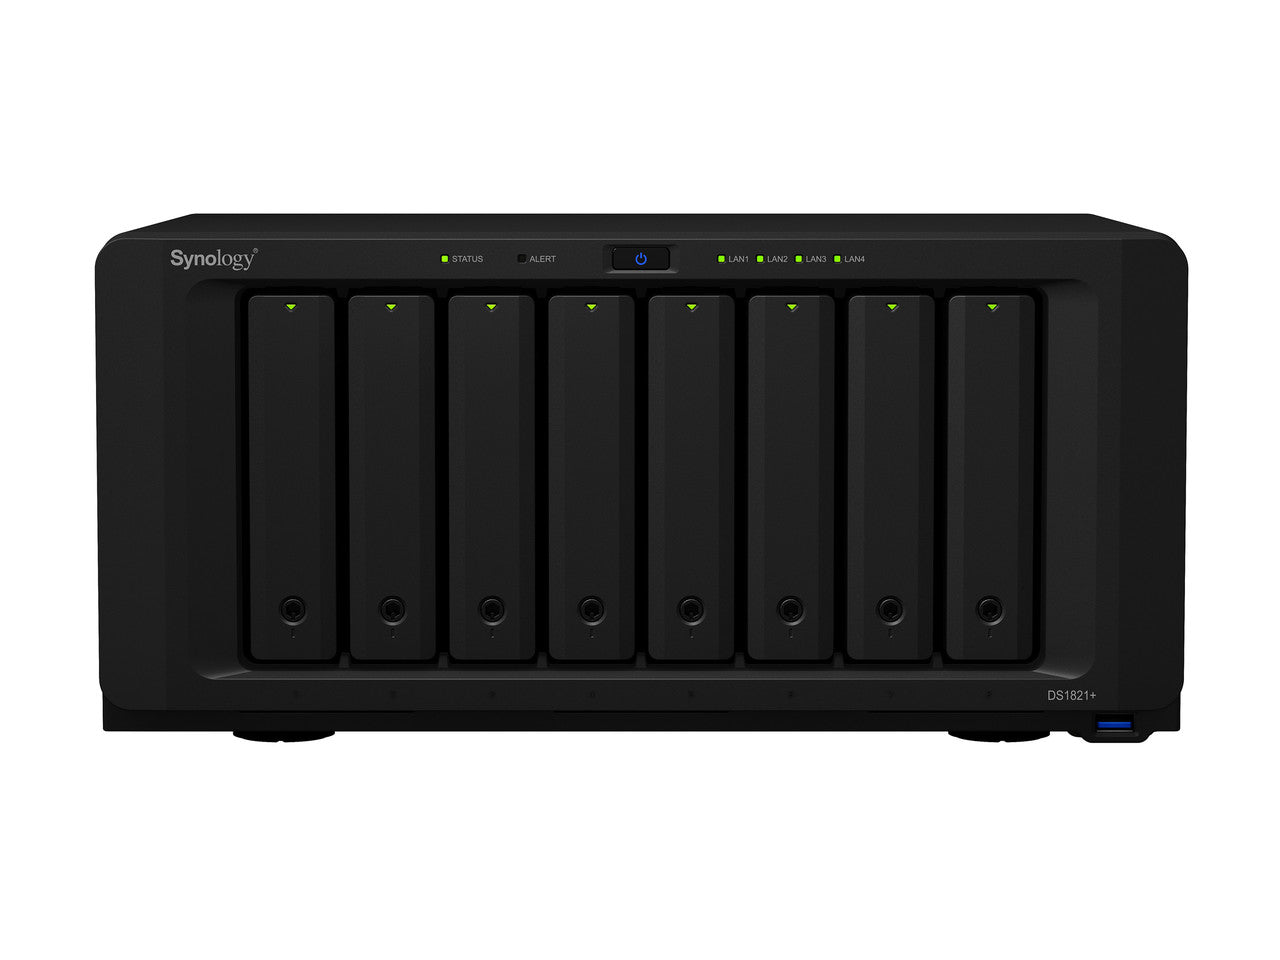 Synology DS1821+ 8-BAY DiskStation with 32GB RAM, 800GB (2x400GB) Cache and 96TB (8 x 12TB) of Synology Enterprise HAT5300 Drives Fully Assembled and Tested By CustomTechSales